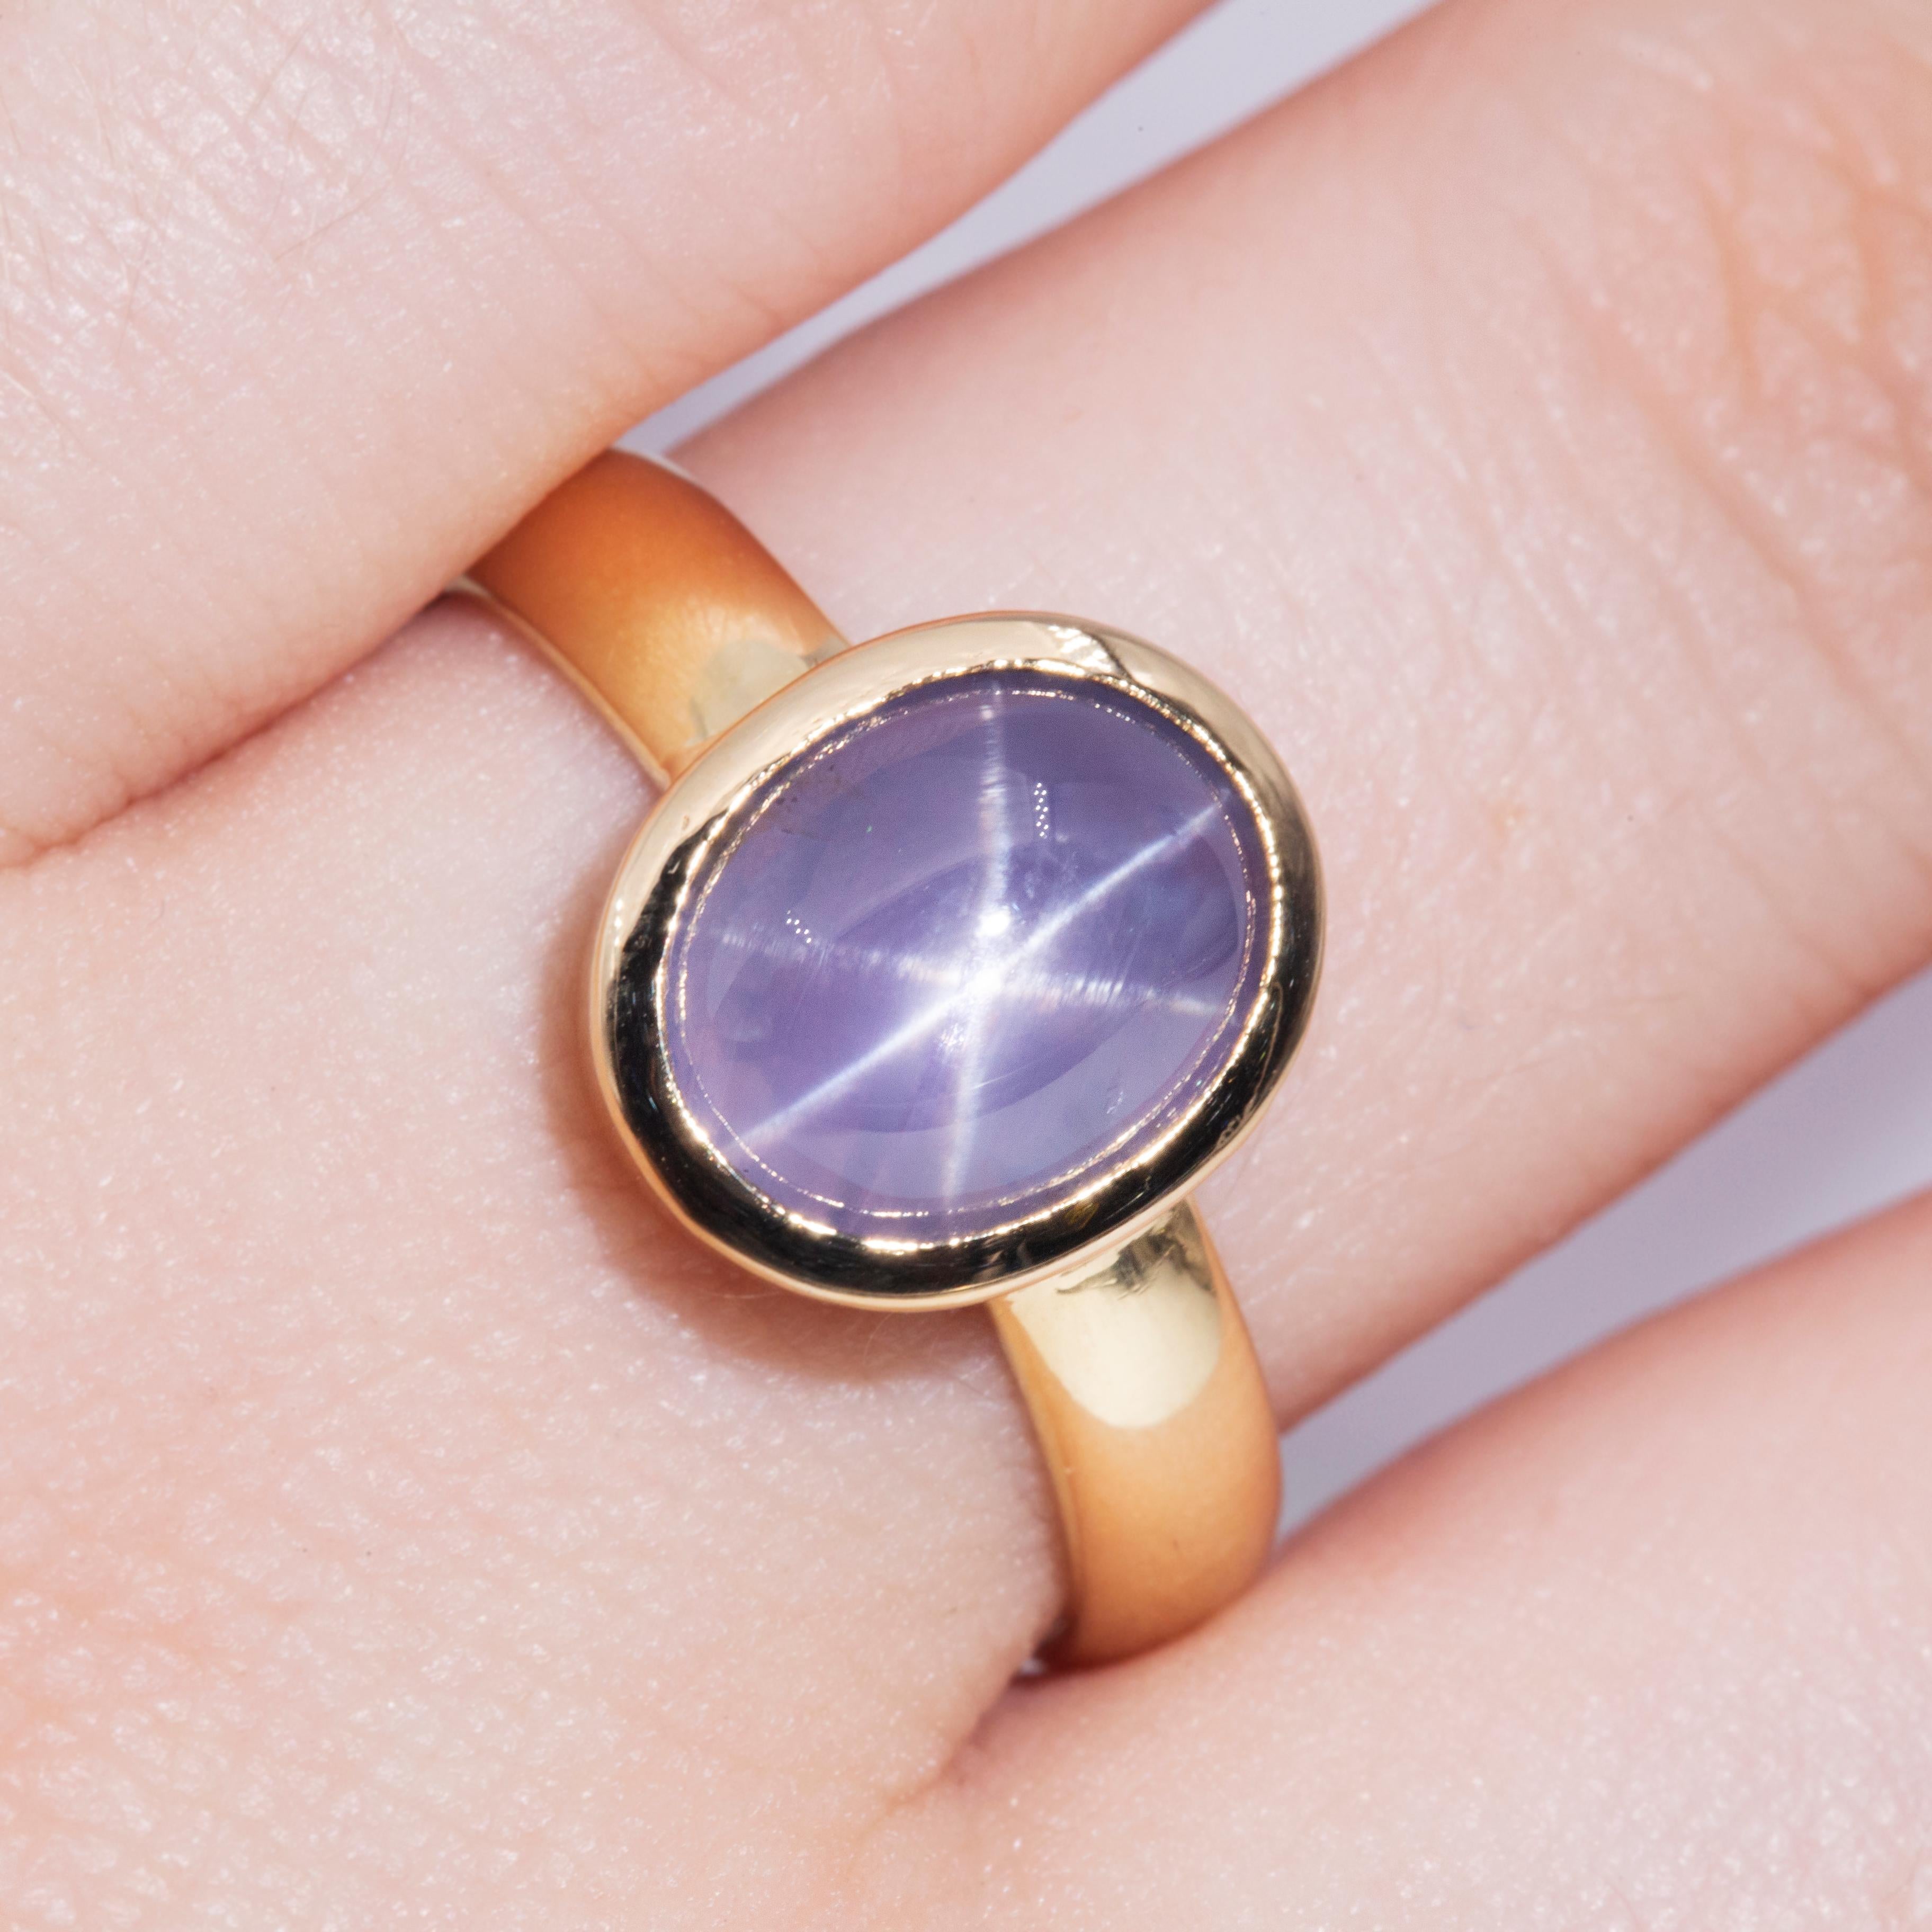 Forged in 18 carat yellow gold, this opulent solitaire vintage ring features an enchanting and rare 4.60 carat Ceylon blue cabochon star sapphire in a darling rubover setting. The captivating translucent blue and the 6-ray star make this jewel a